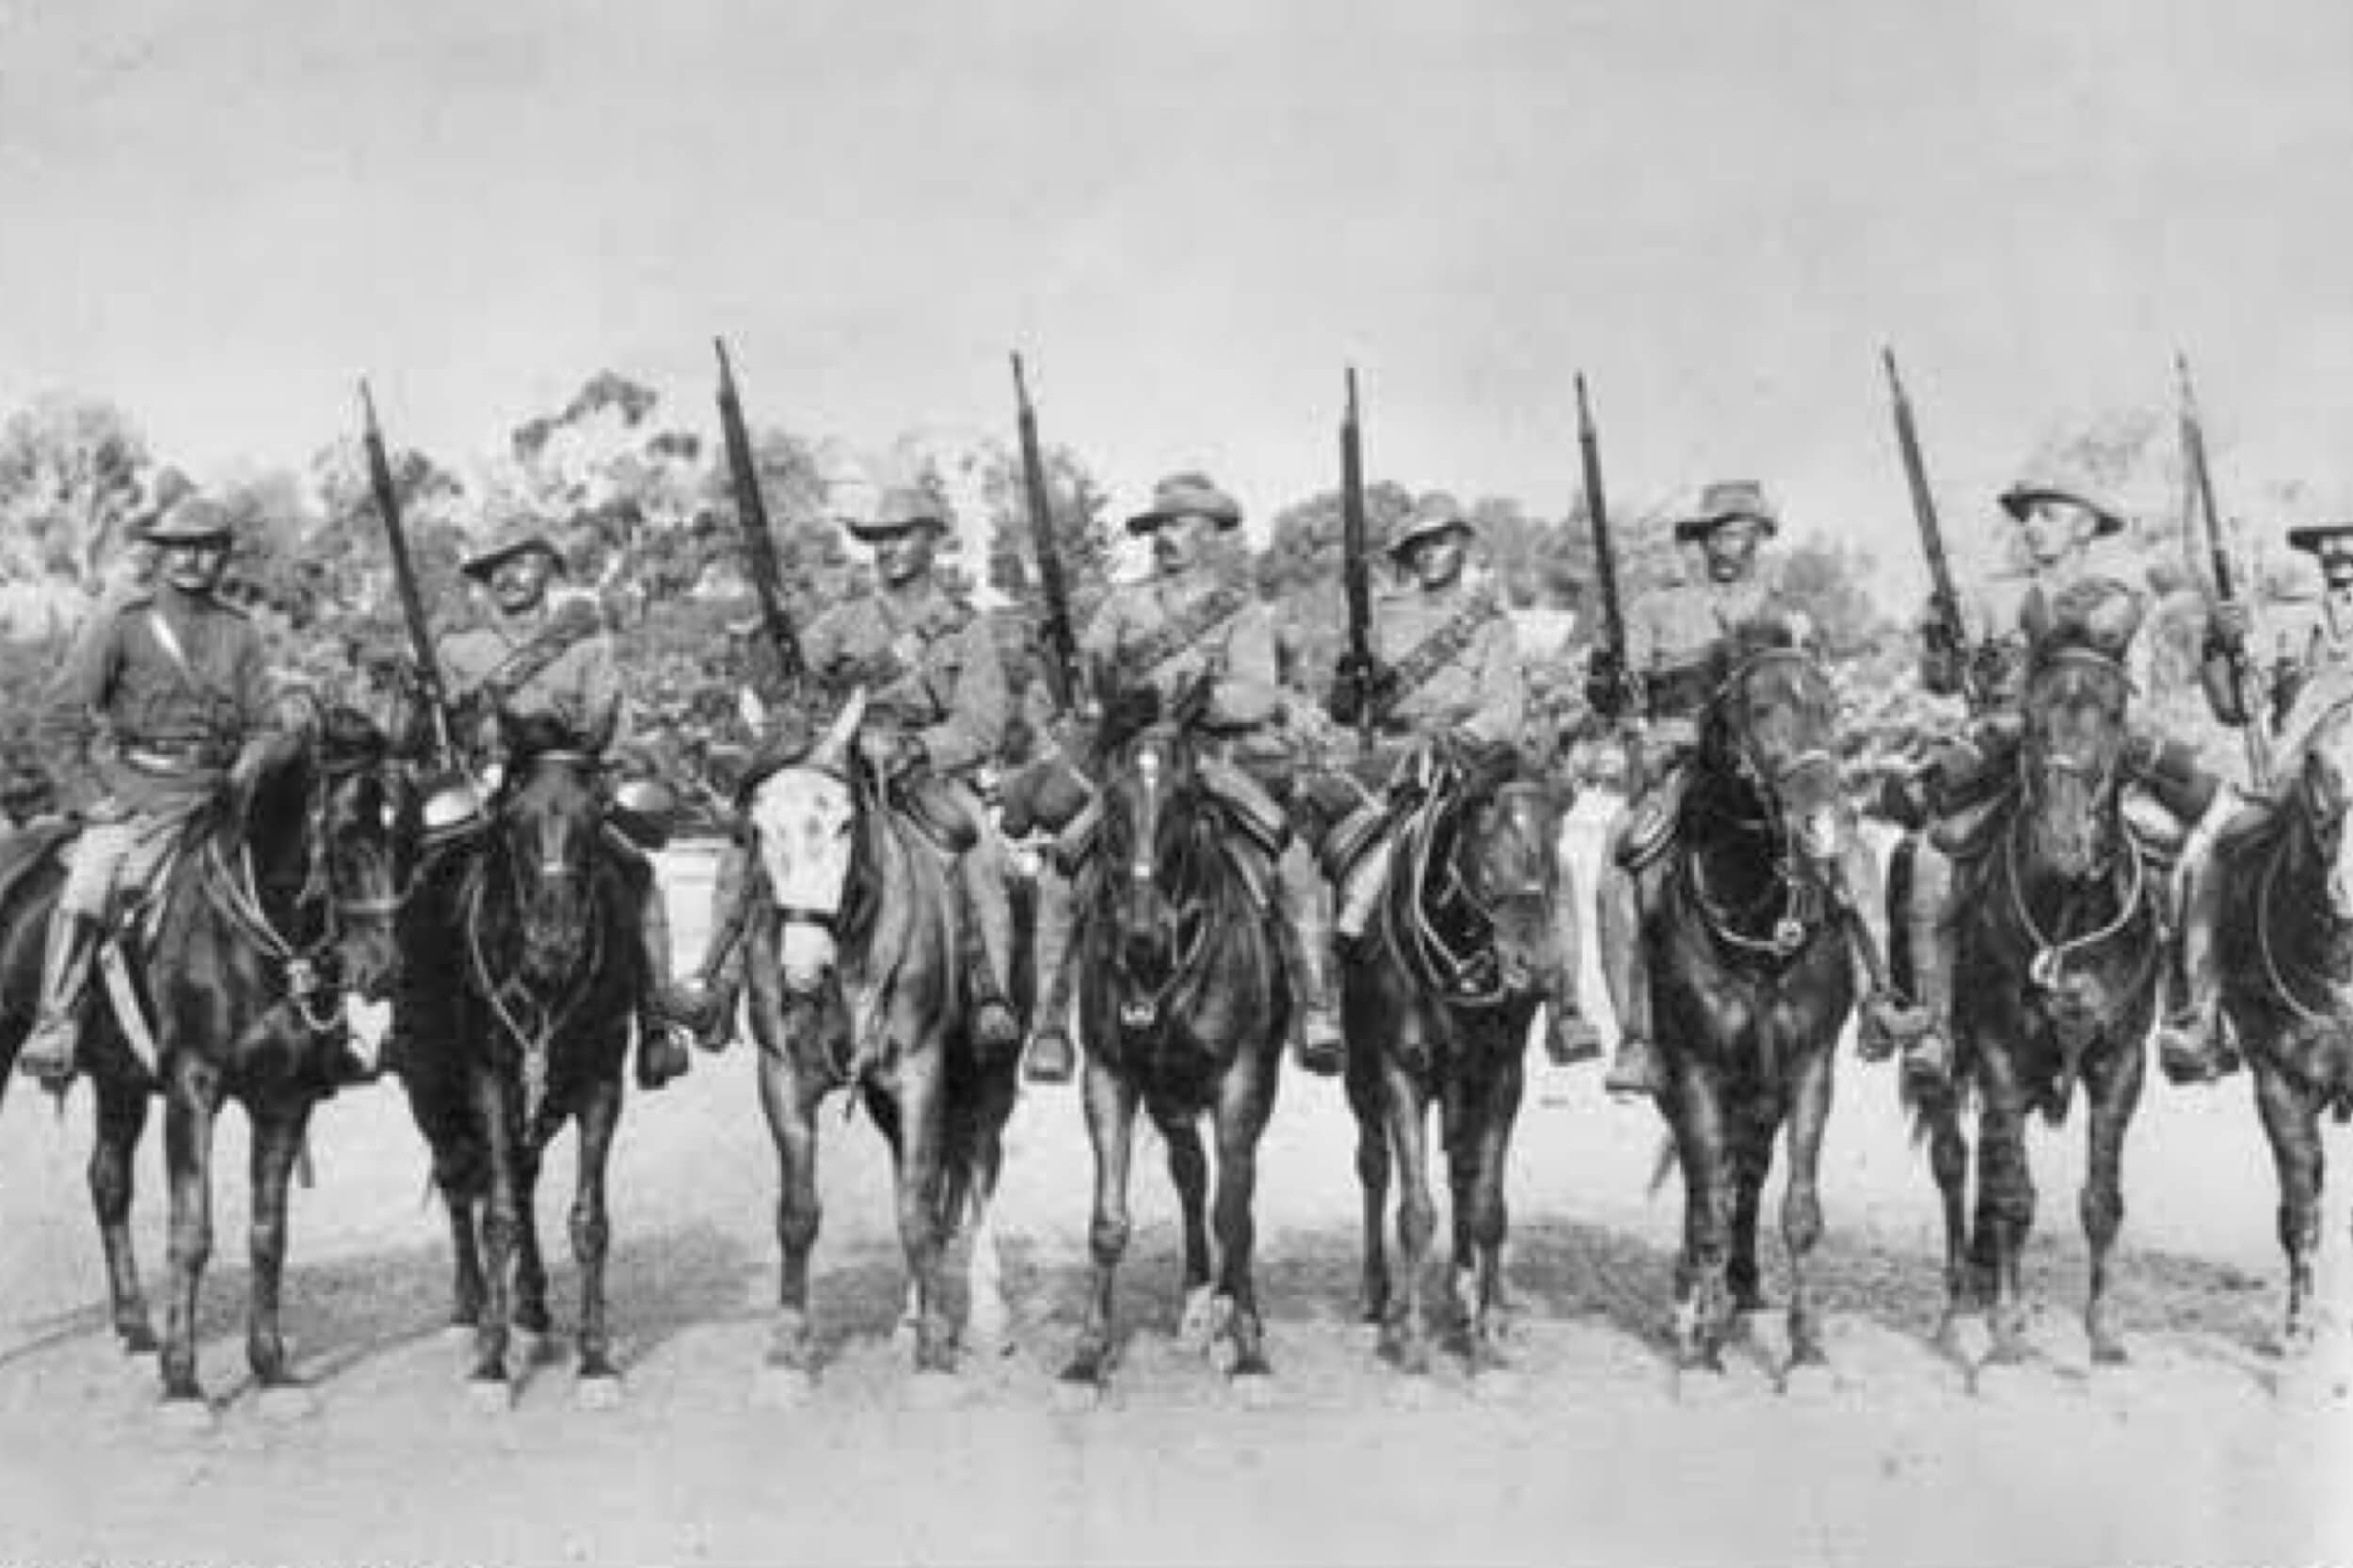 Shedding light on the story of 50 Aboriginal trackers left behind after the Boer War